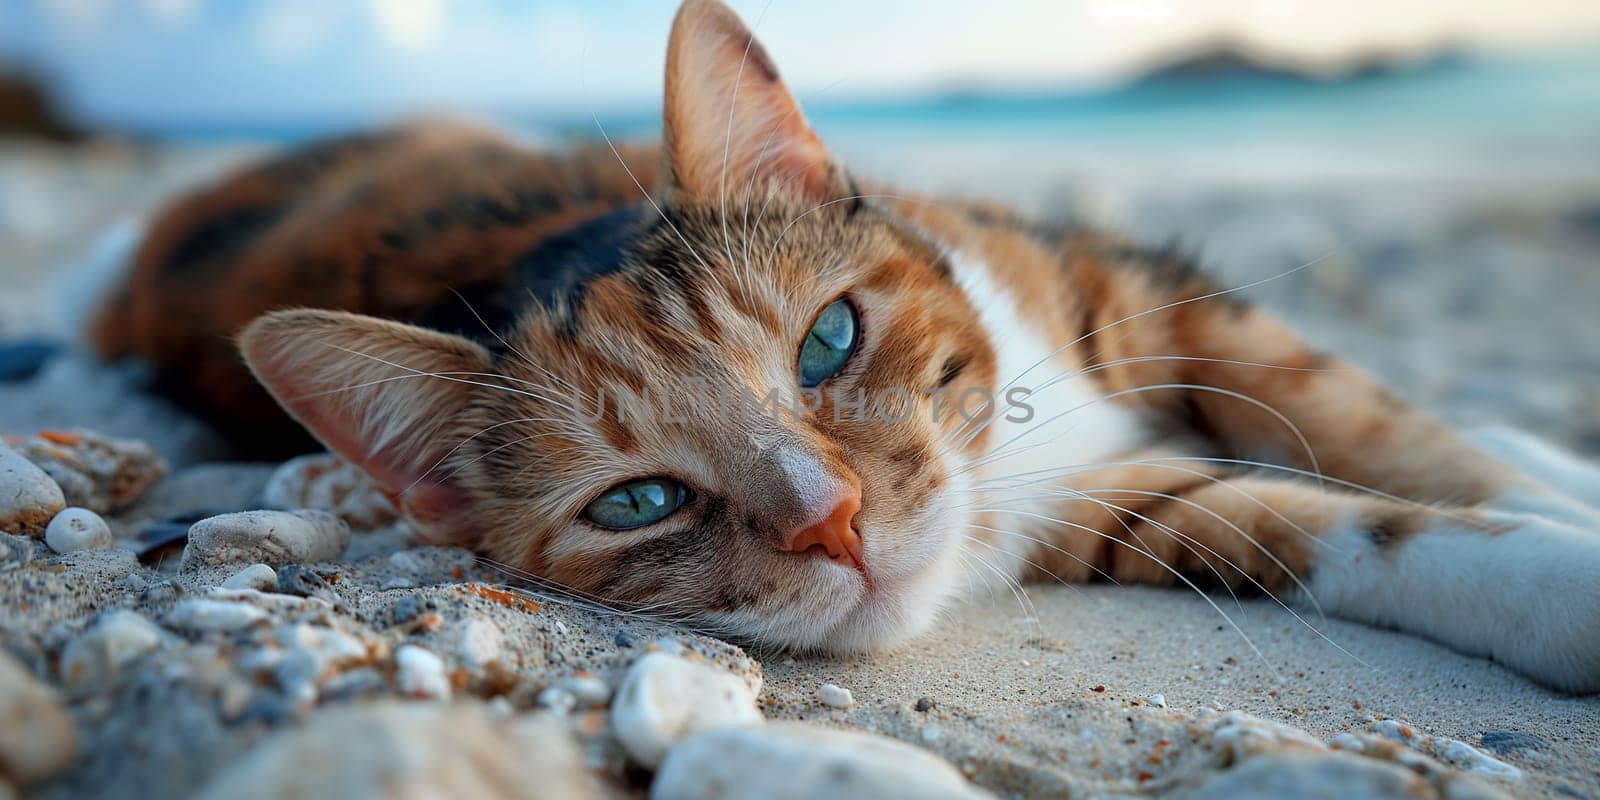 A serene calico cat relaxing on a sandy beach with a clear blue sky.